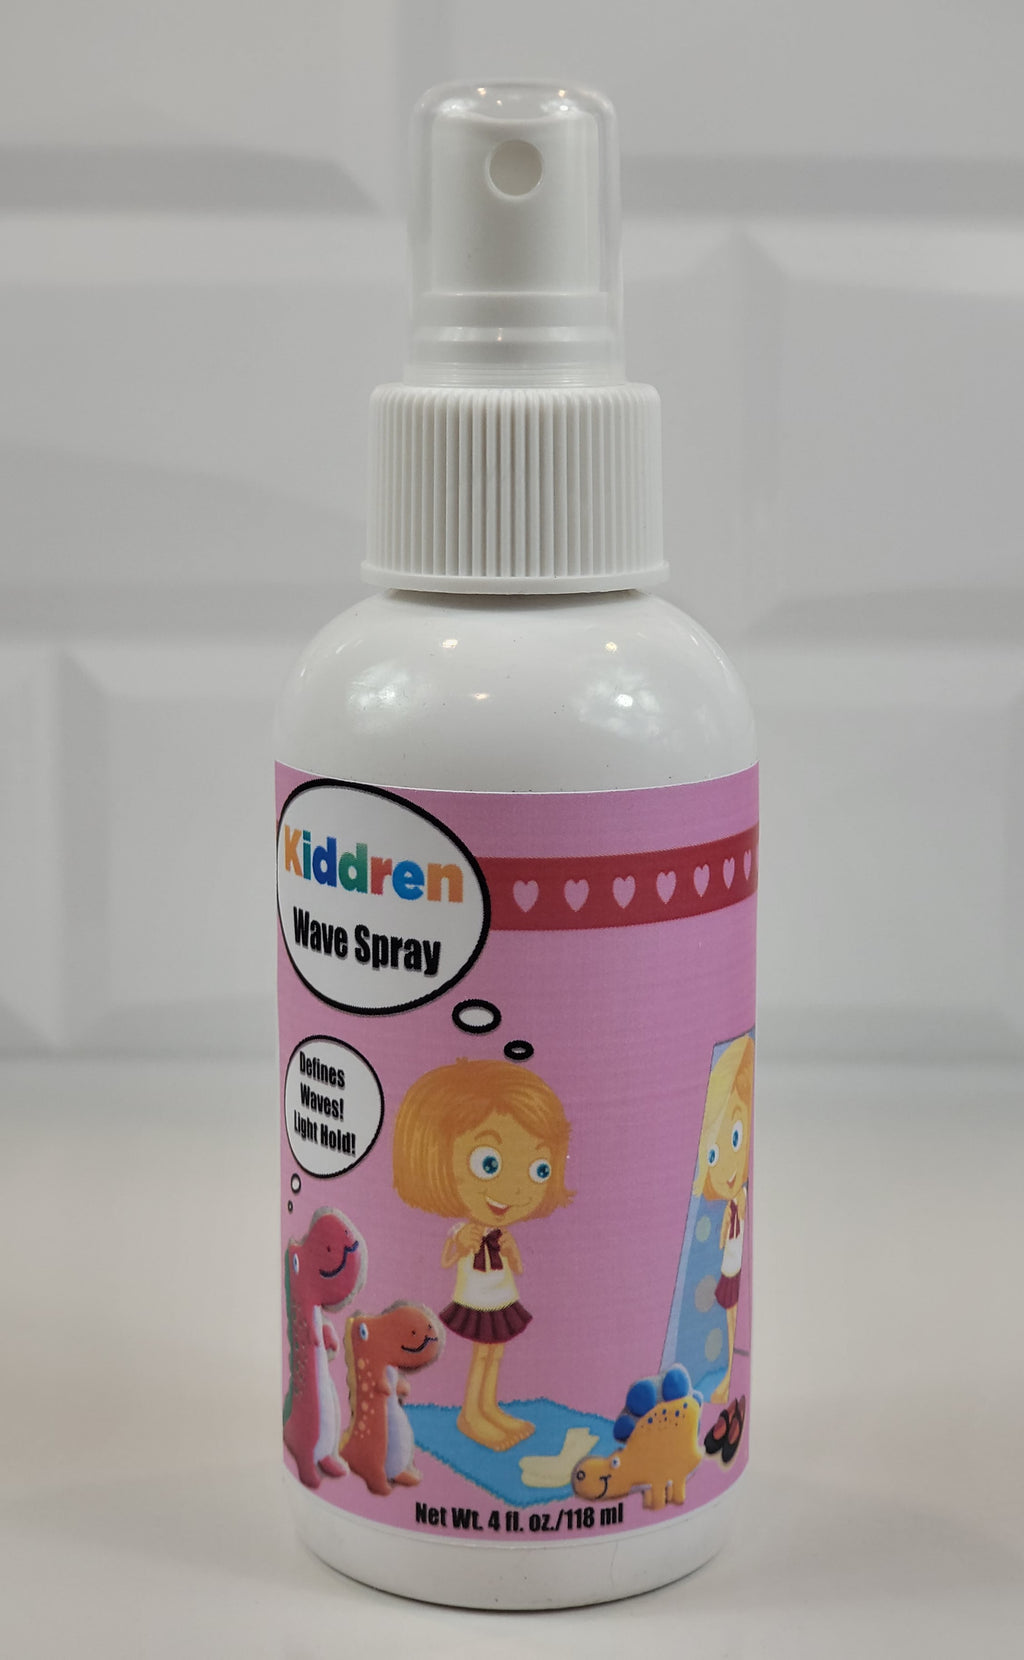 Kiddren Wave Spray 4 ounce wave spray for kids hair brings out natural beachy waves and provides a light hold